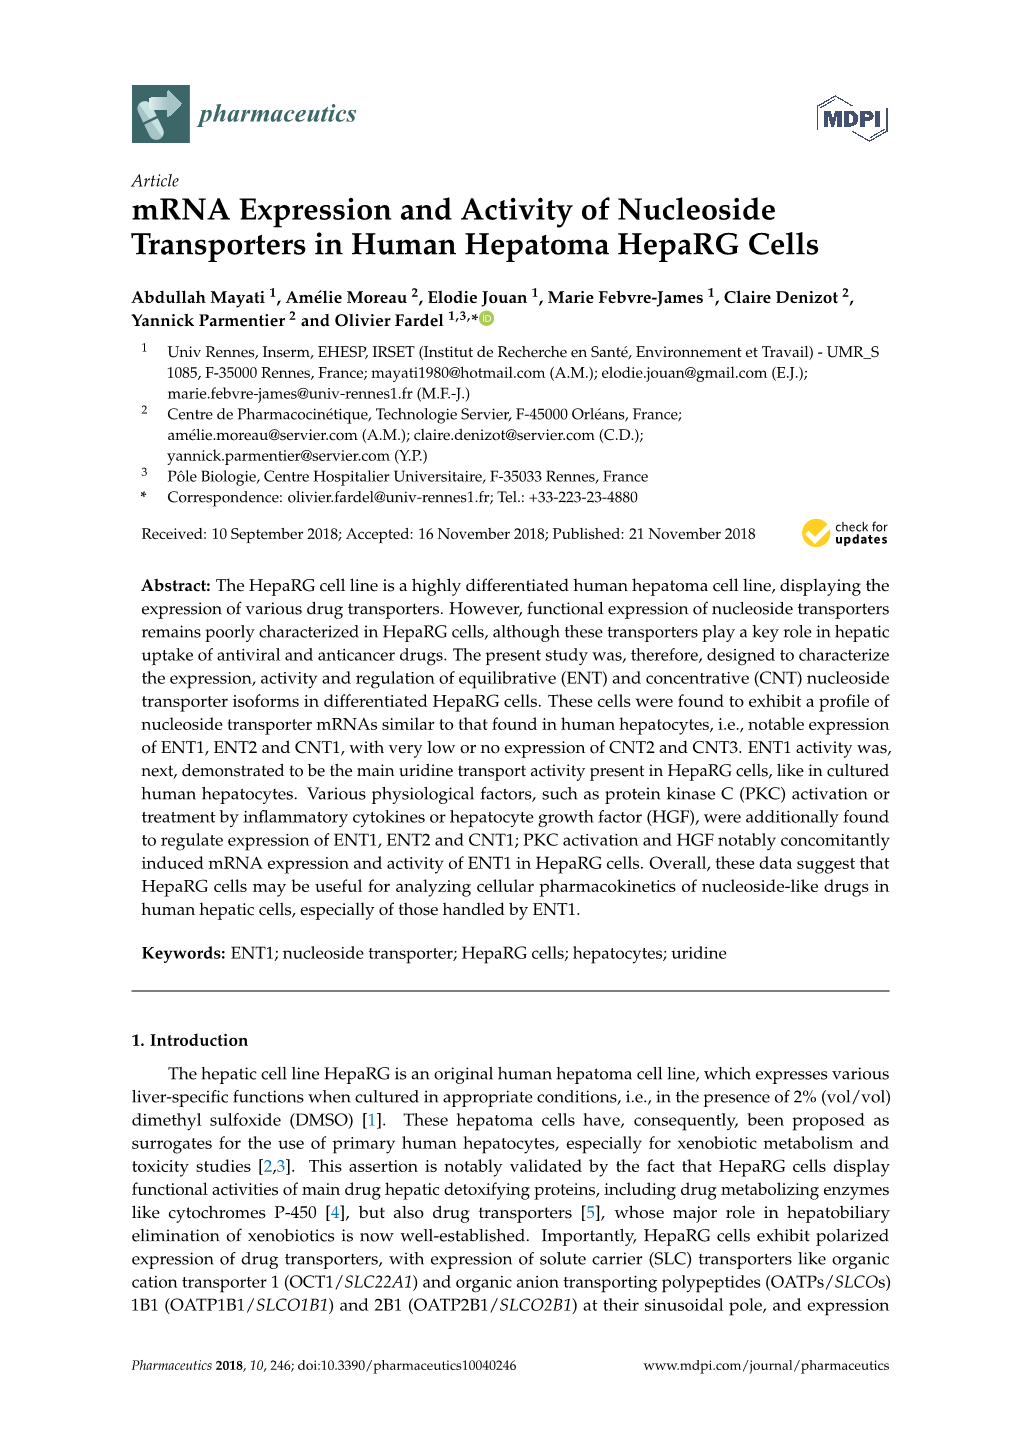 Mrna Expression and Activity of Nucleoside Transporters in Human Hepatoma Heparg Cells